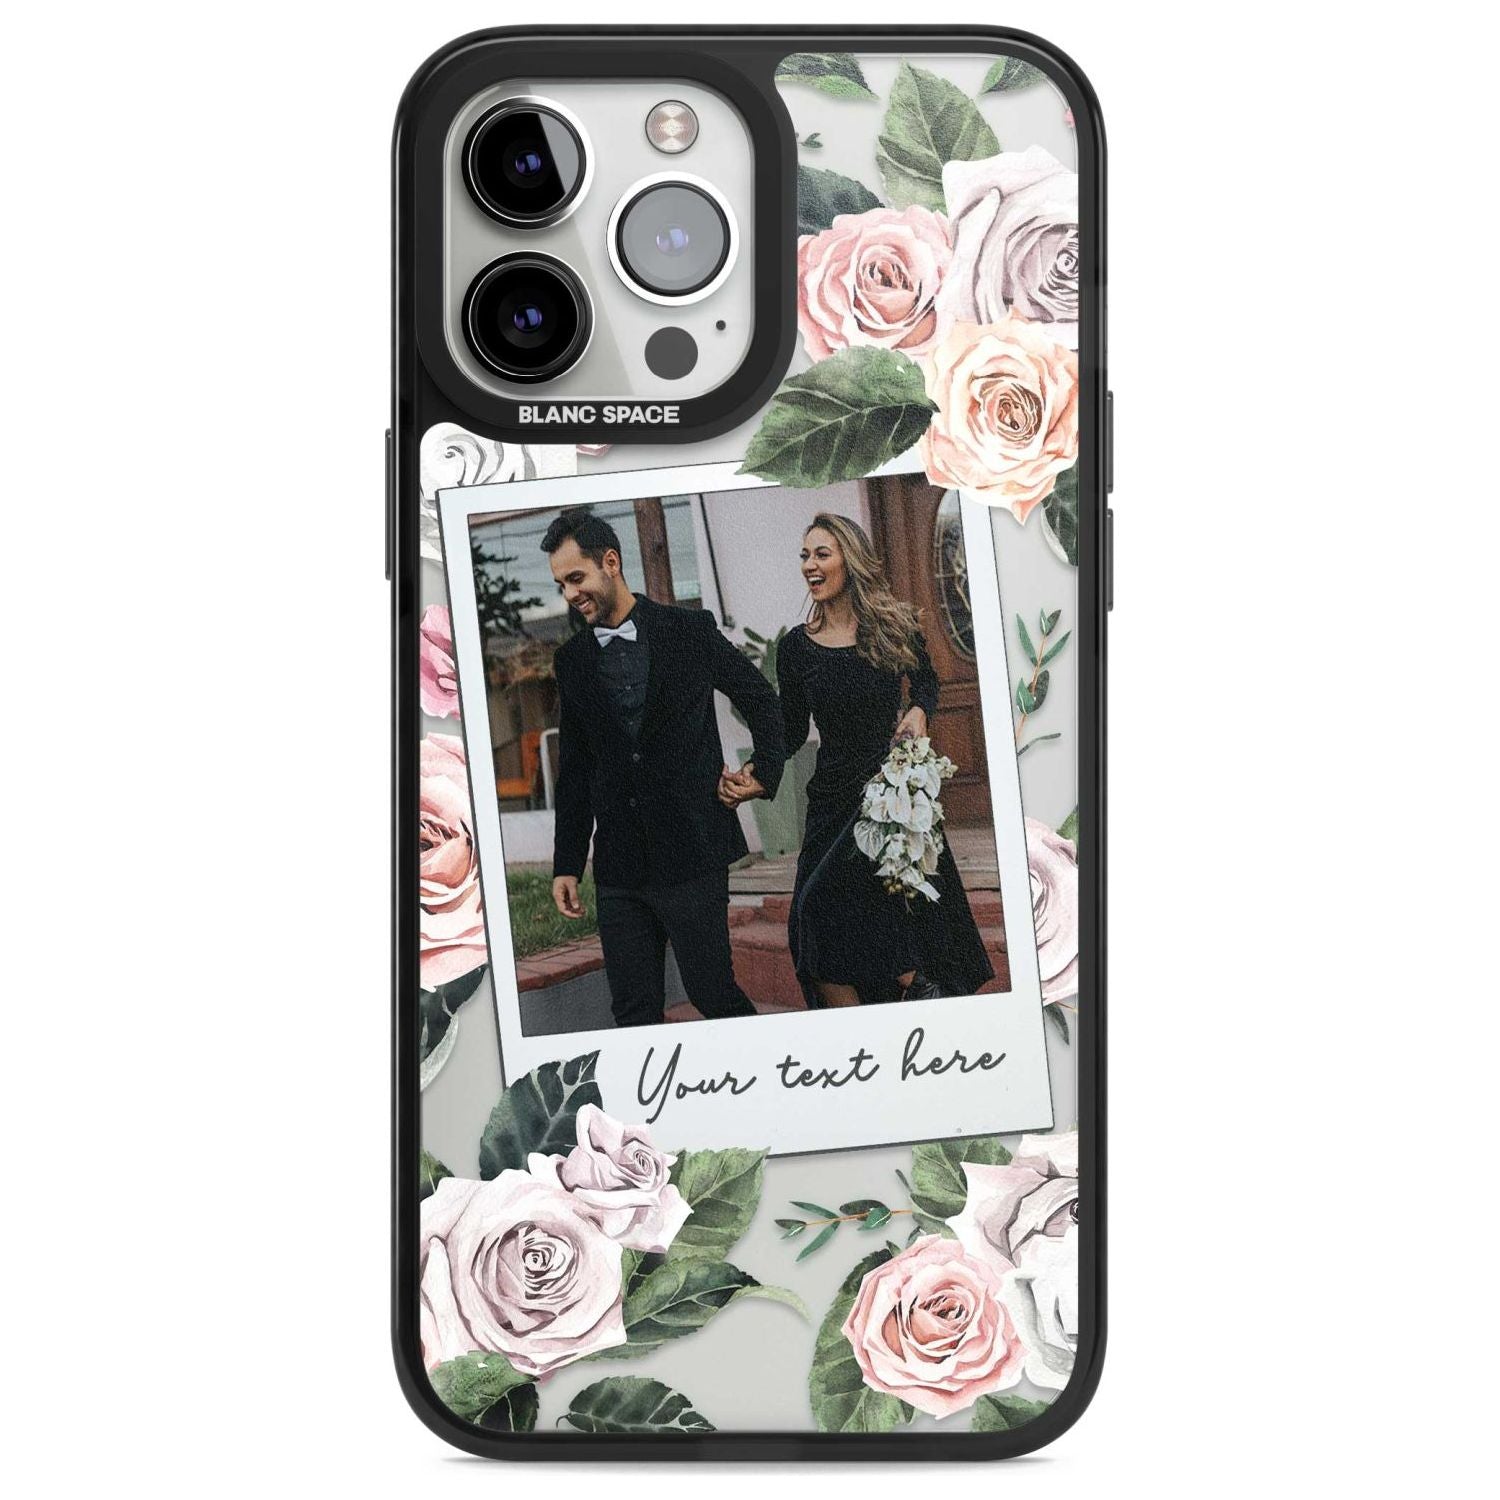 Personalised Floral Instant Film Photo Custom Phone Case iPhone 13 Pro Max / Magsafe Black Impact Case Blanc Space